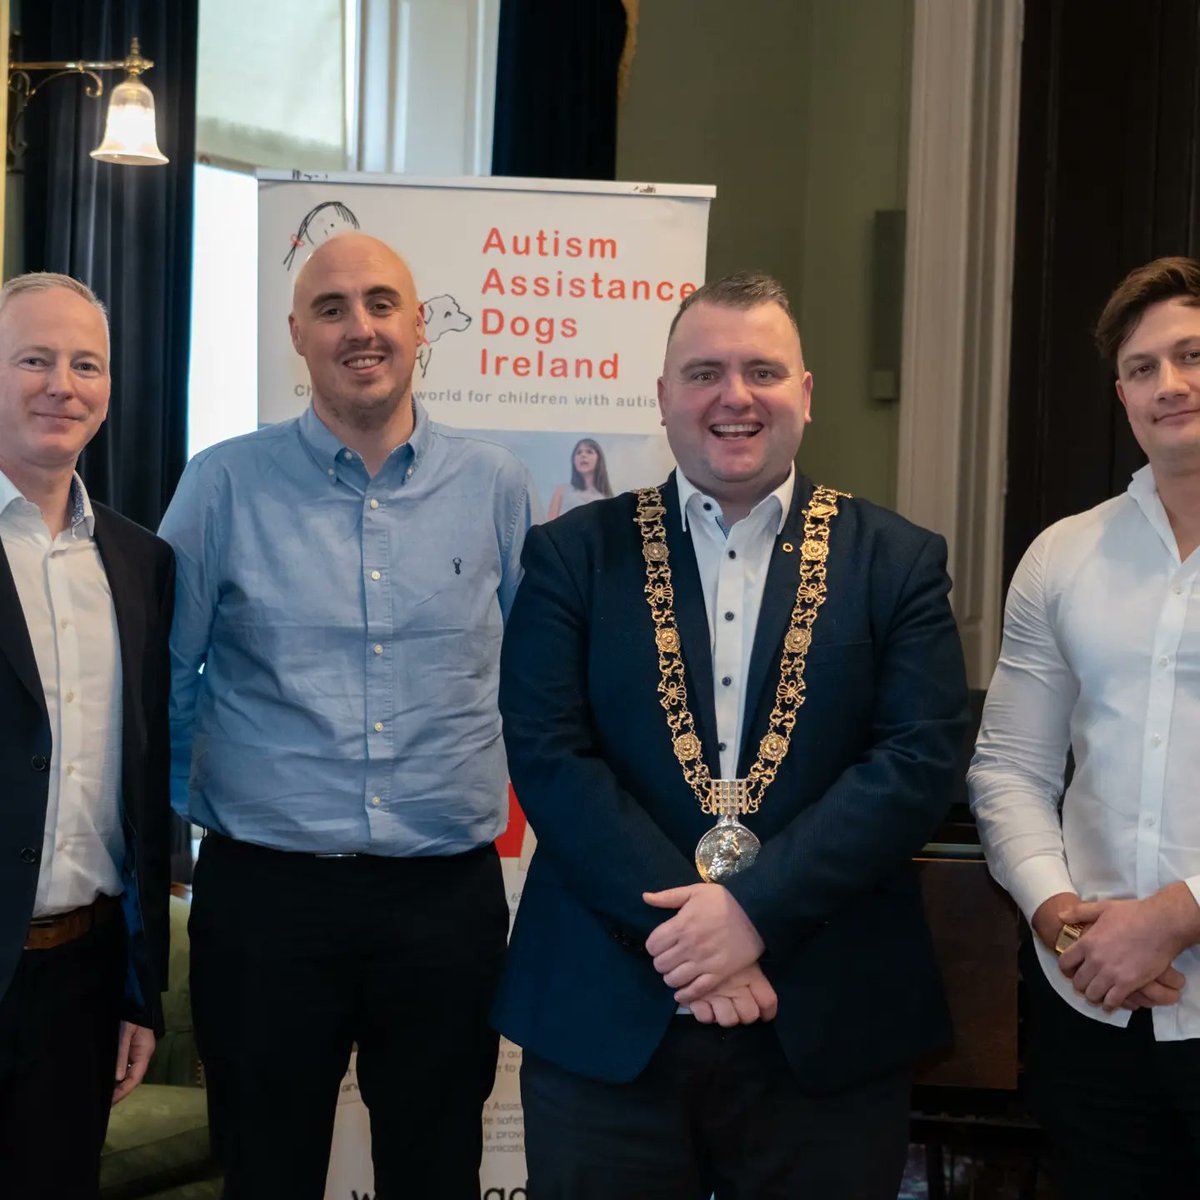 It was fantastic to host @autismdogsirl (AADI) at the Mansion House last Wednesday. 🐕 AADI provides specially trained assistance dogs to help protect children with autism. The dog’s priority is the child’s safety while also promoting independence and reducing anxiety.